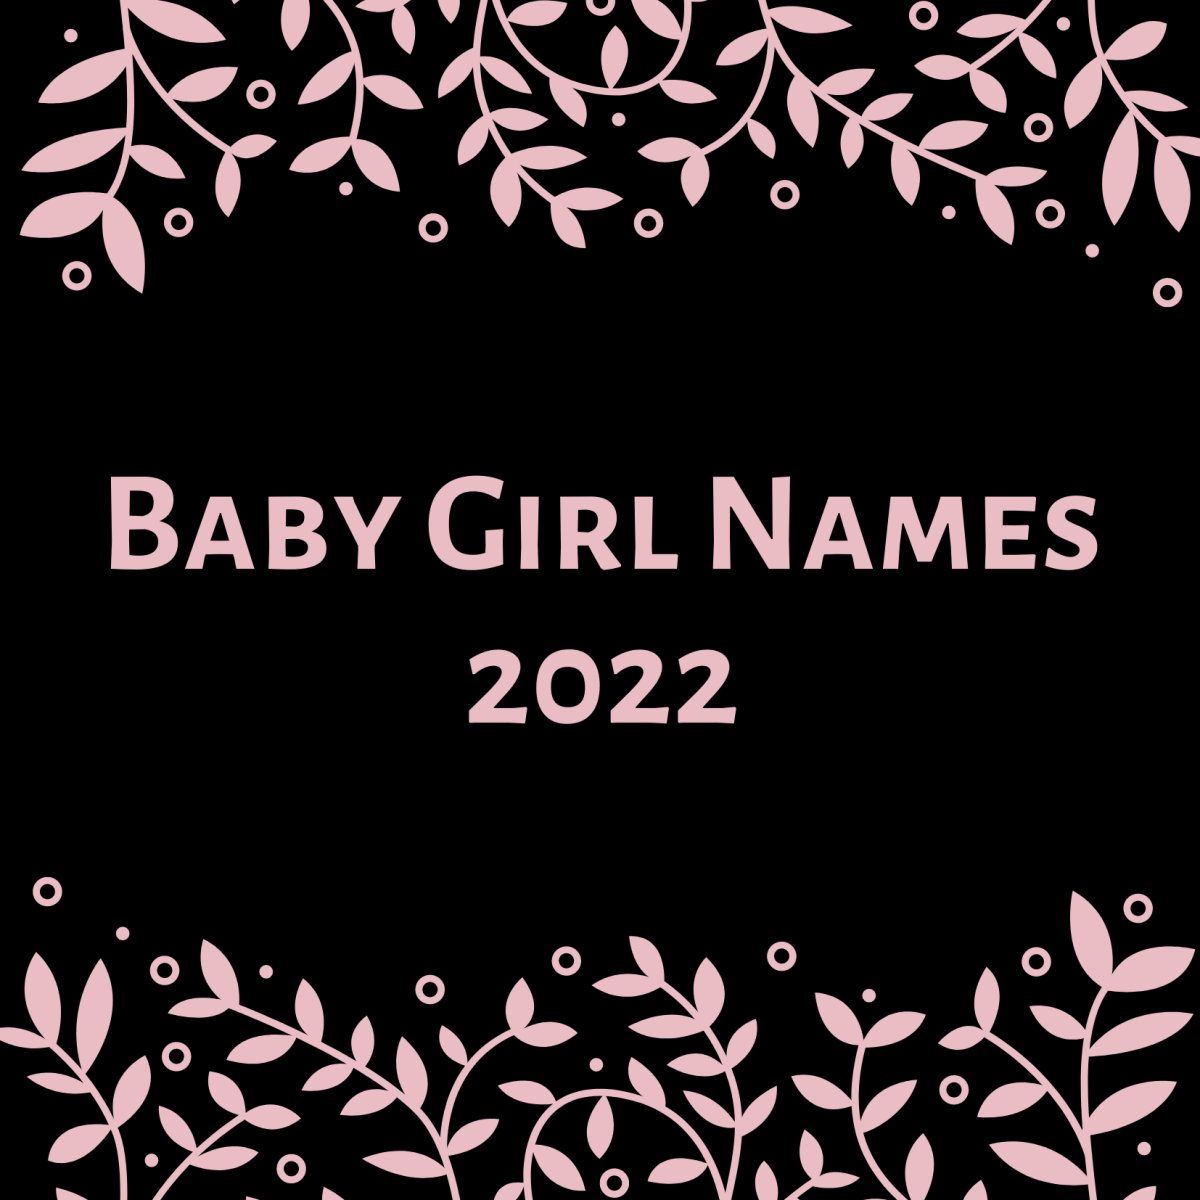 Top Names for Baby Girls in 2022